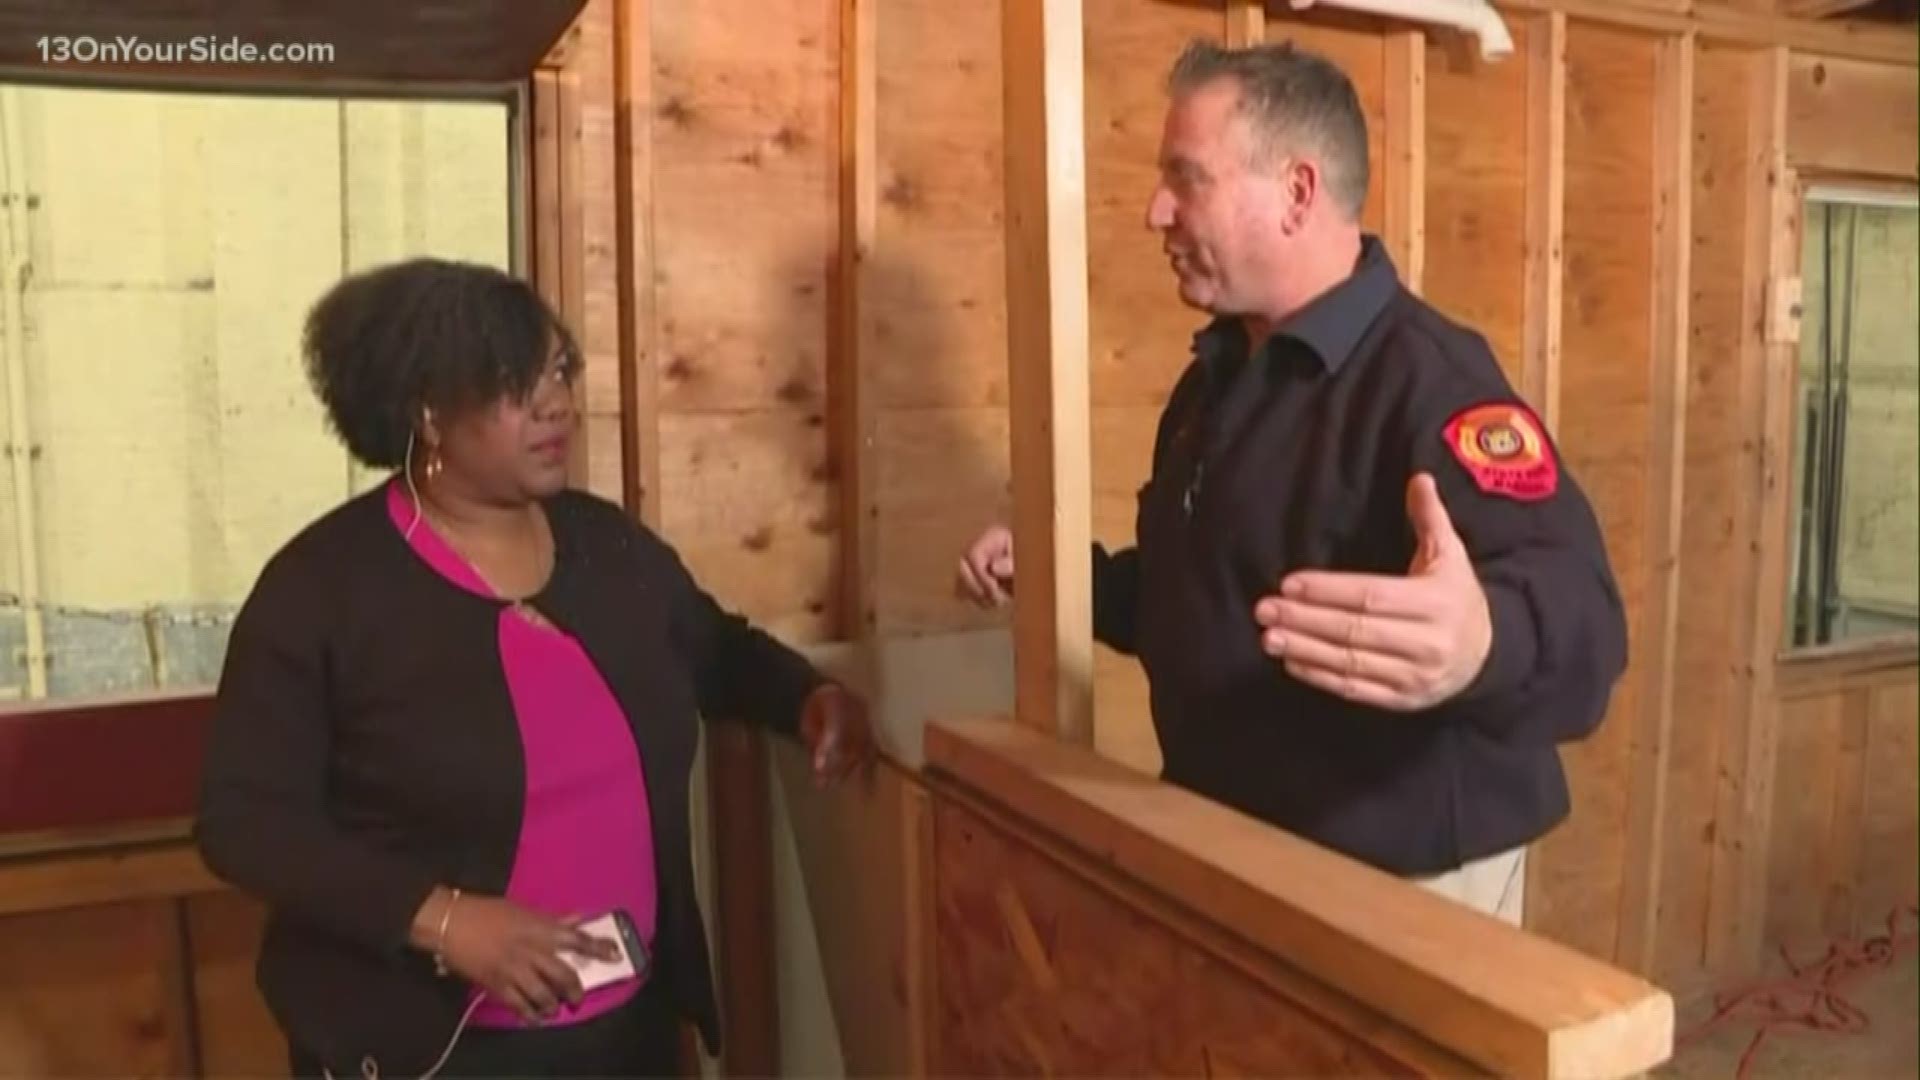 The state's Fire Marshal is stressing the importance of working smoke alarms after a Grand Rapids family was killed in a house fire Wednesday.